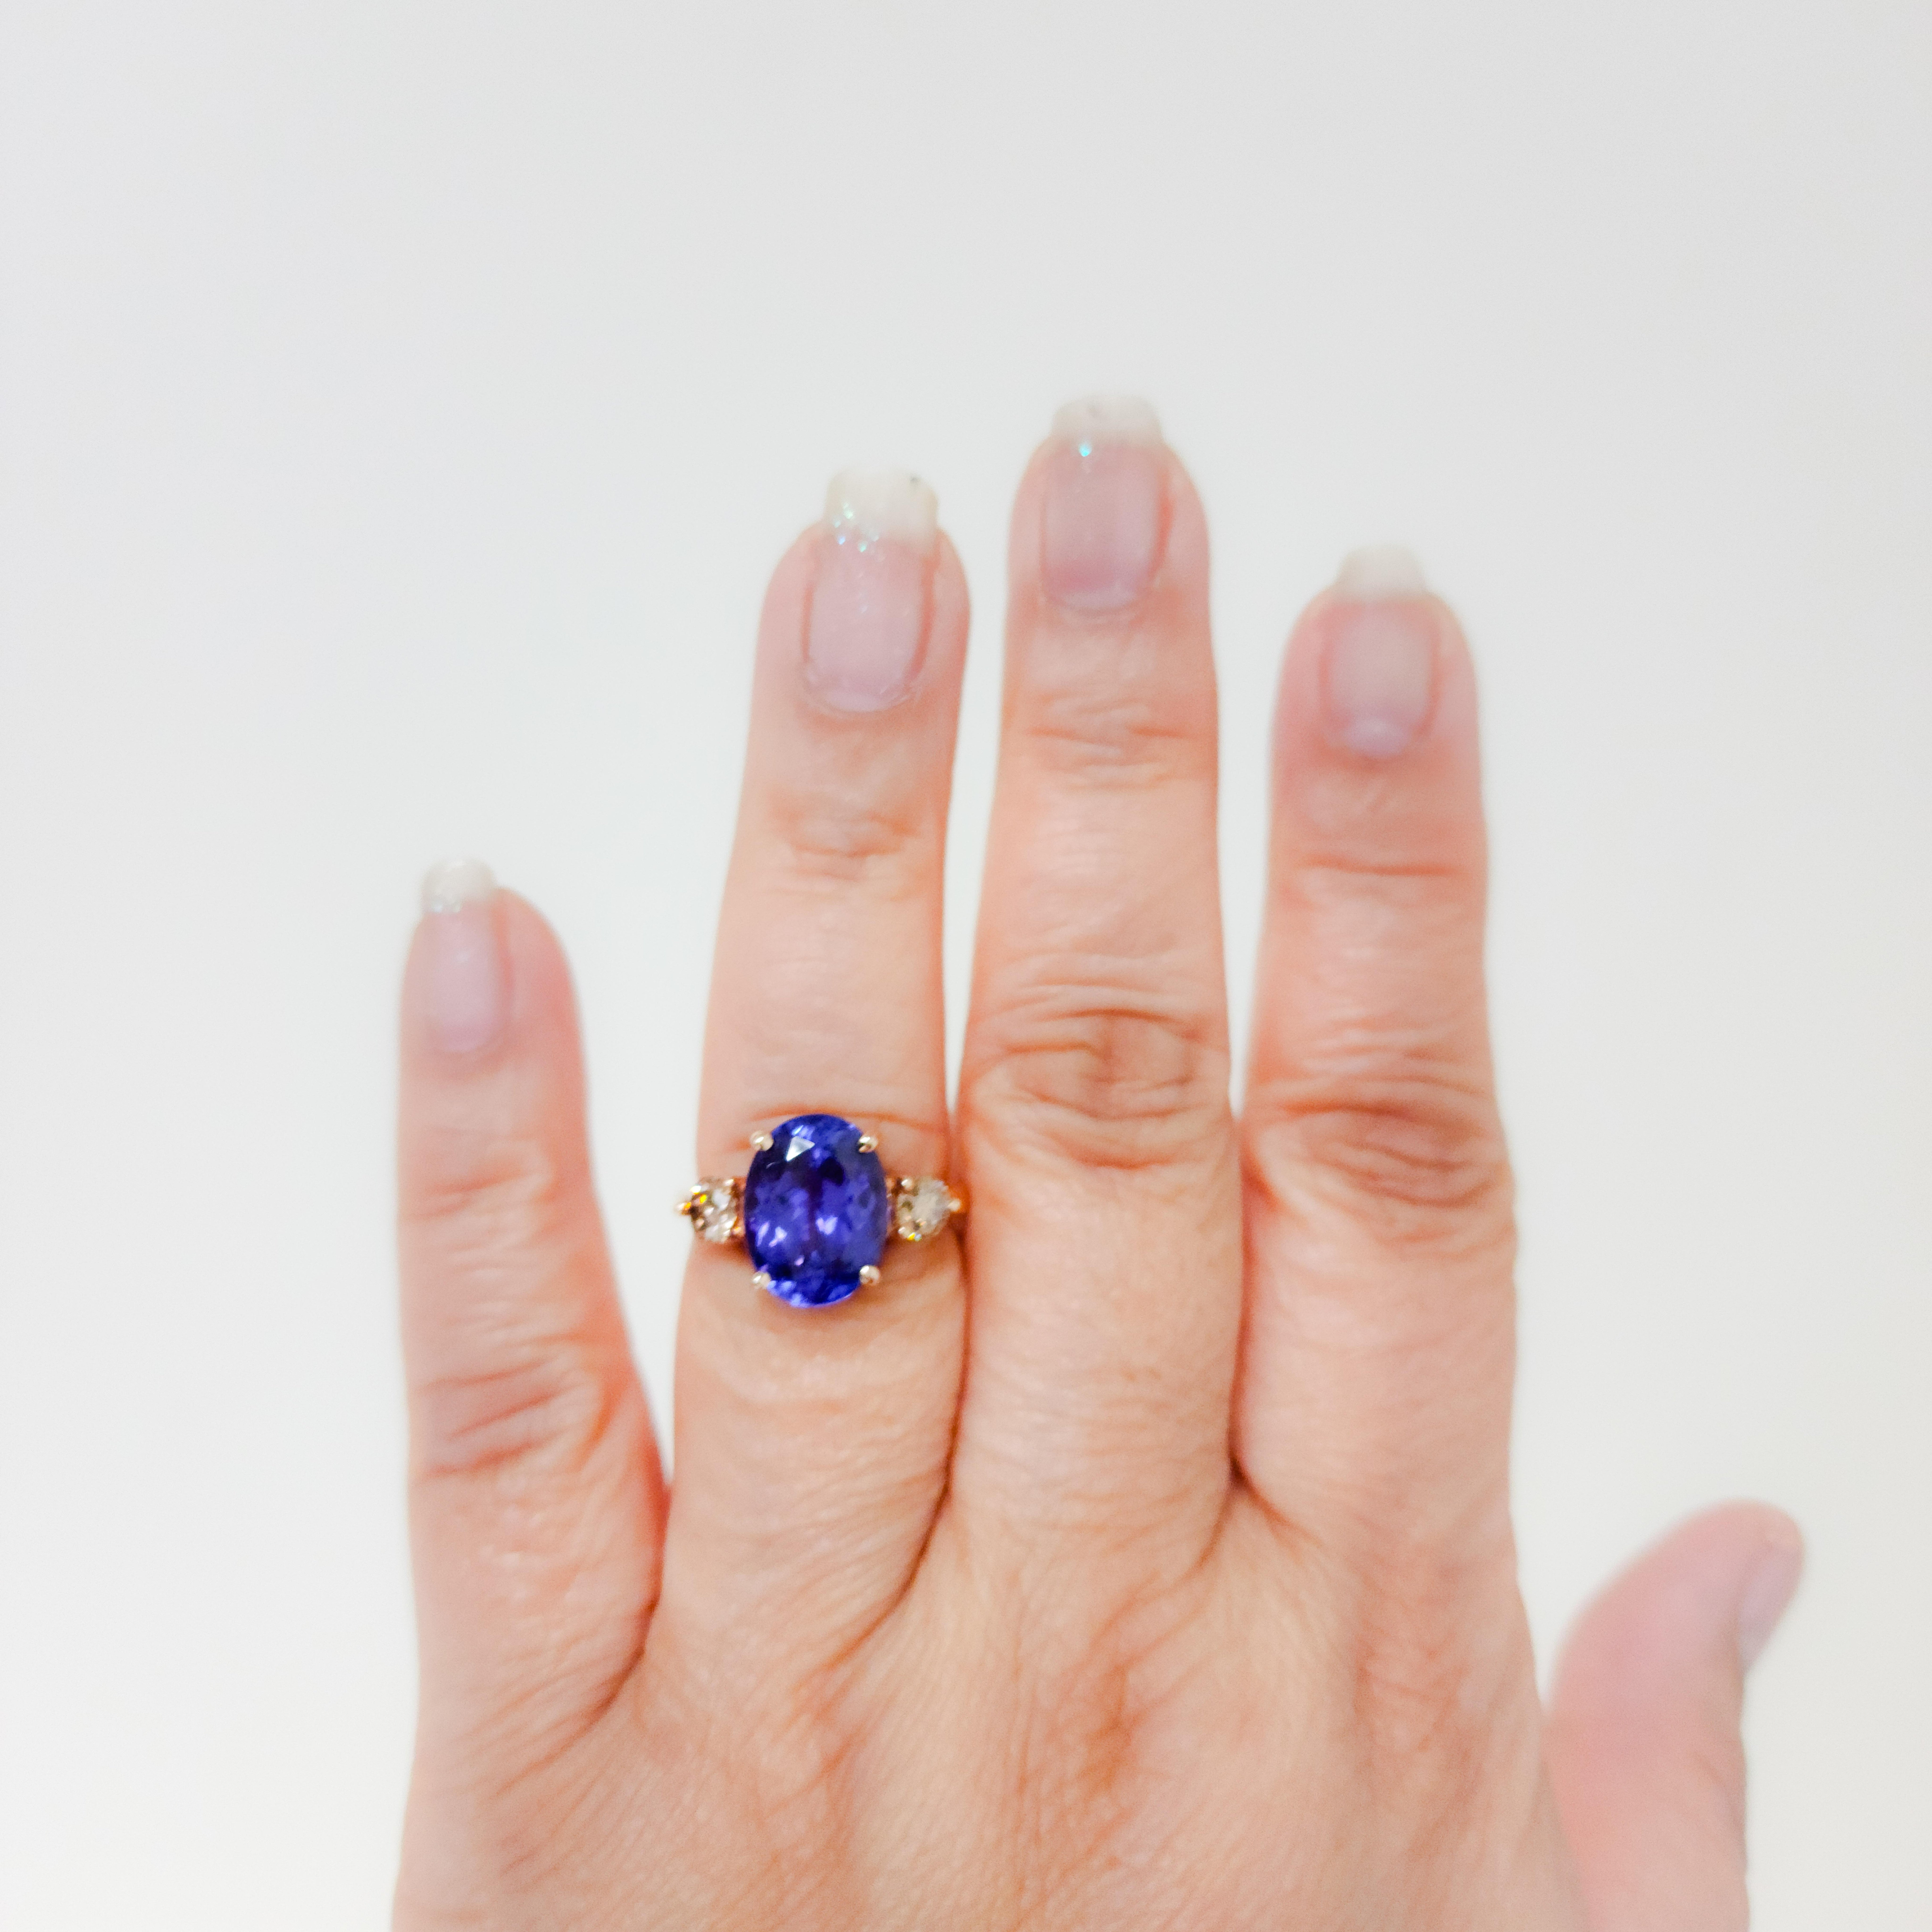 Beautiful 5.89 ct. tanzanite oval with 0.69 ct. champagne diamond rounds.  Handmade in 14k rose gold.  Ring size 7.5.